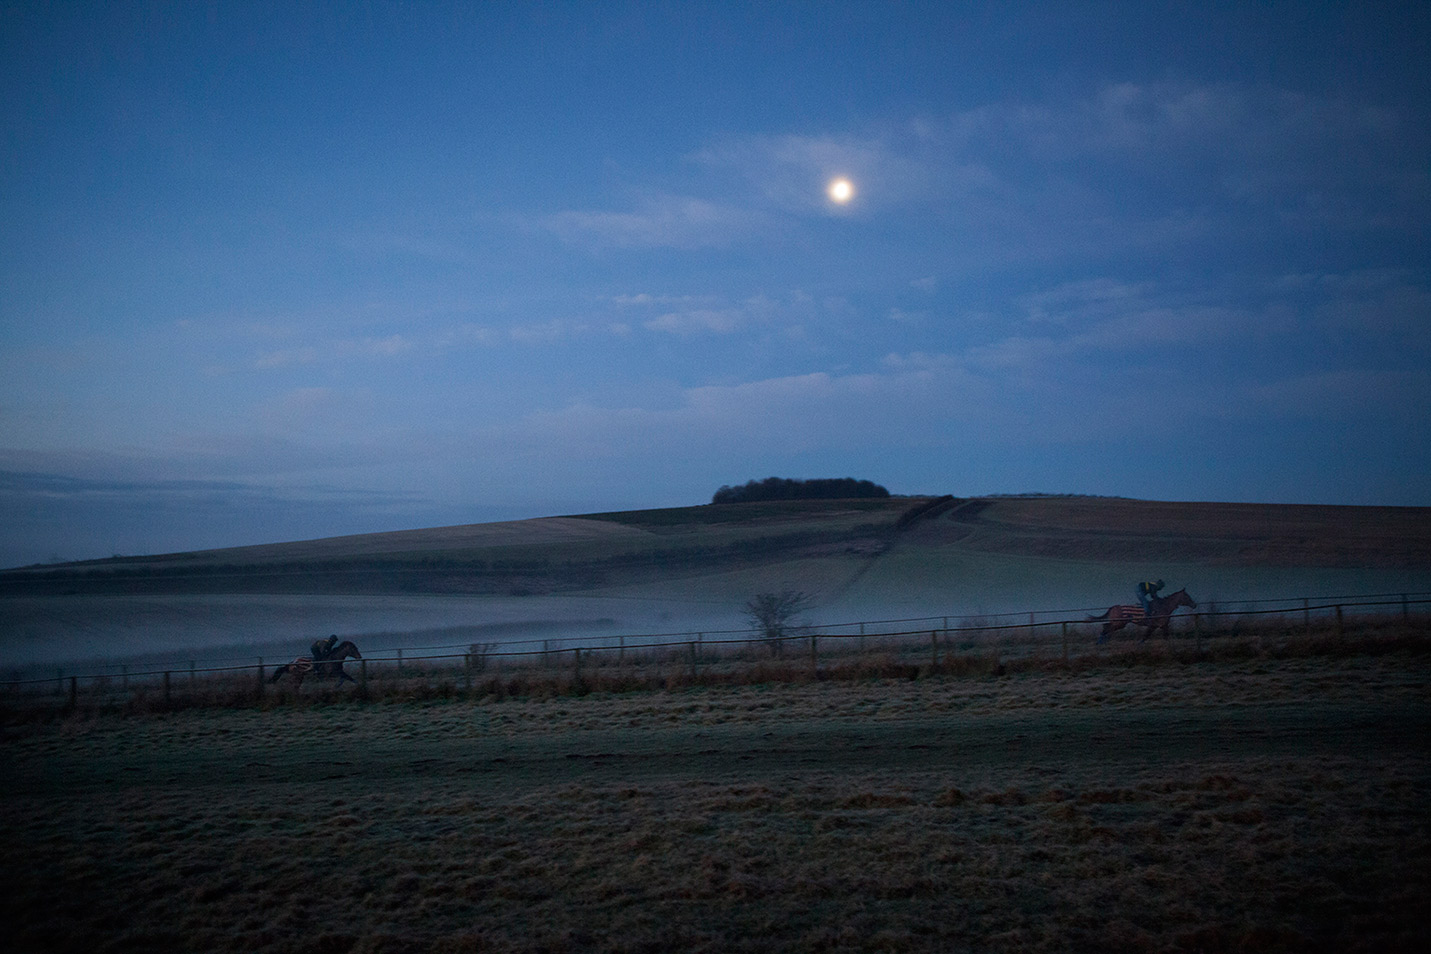 Horses-on-the-gallop-under-moonlight